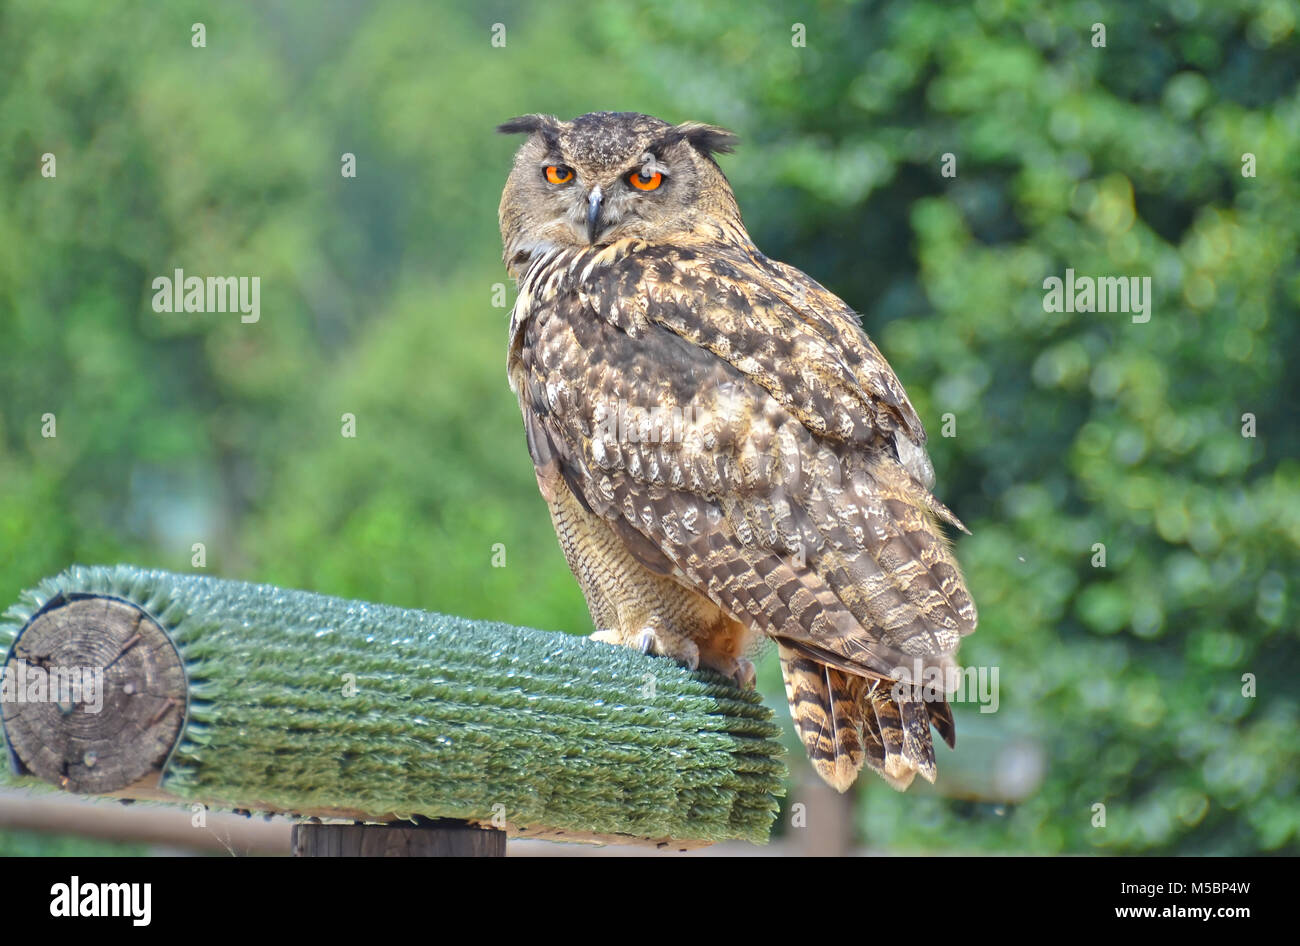 The penetrating stare of an eagle owl on a perch Stock Photo